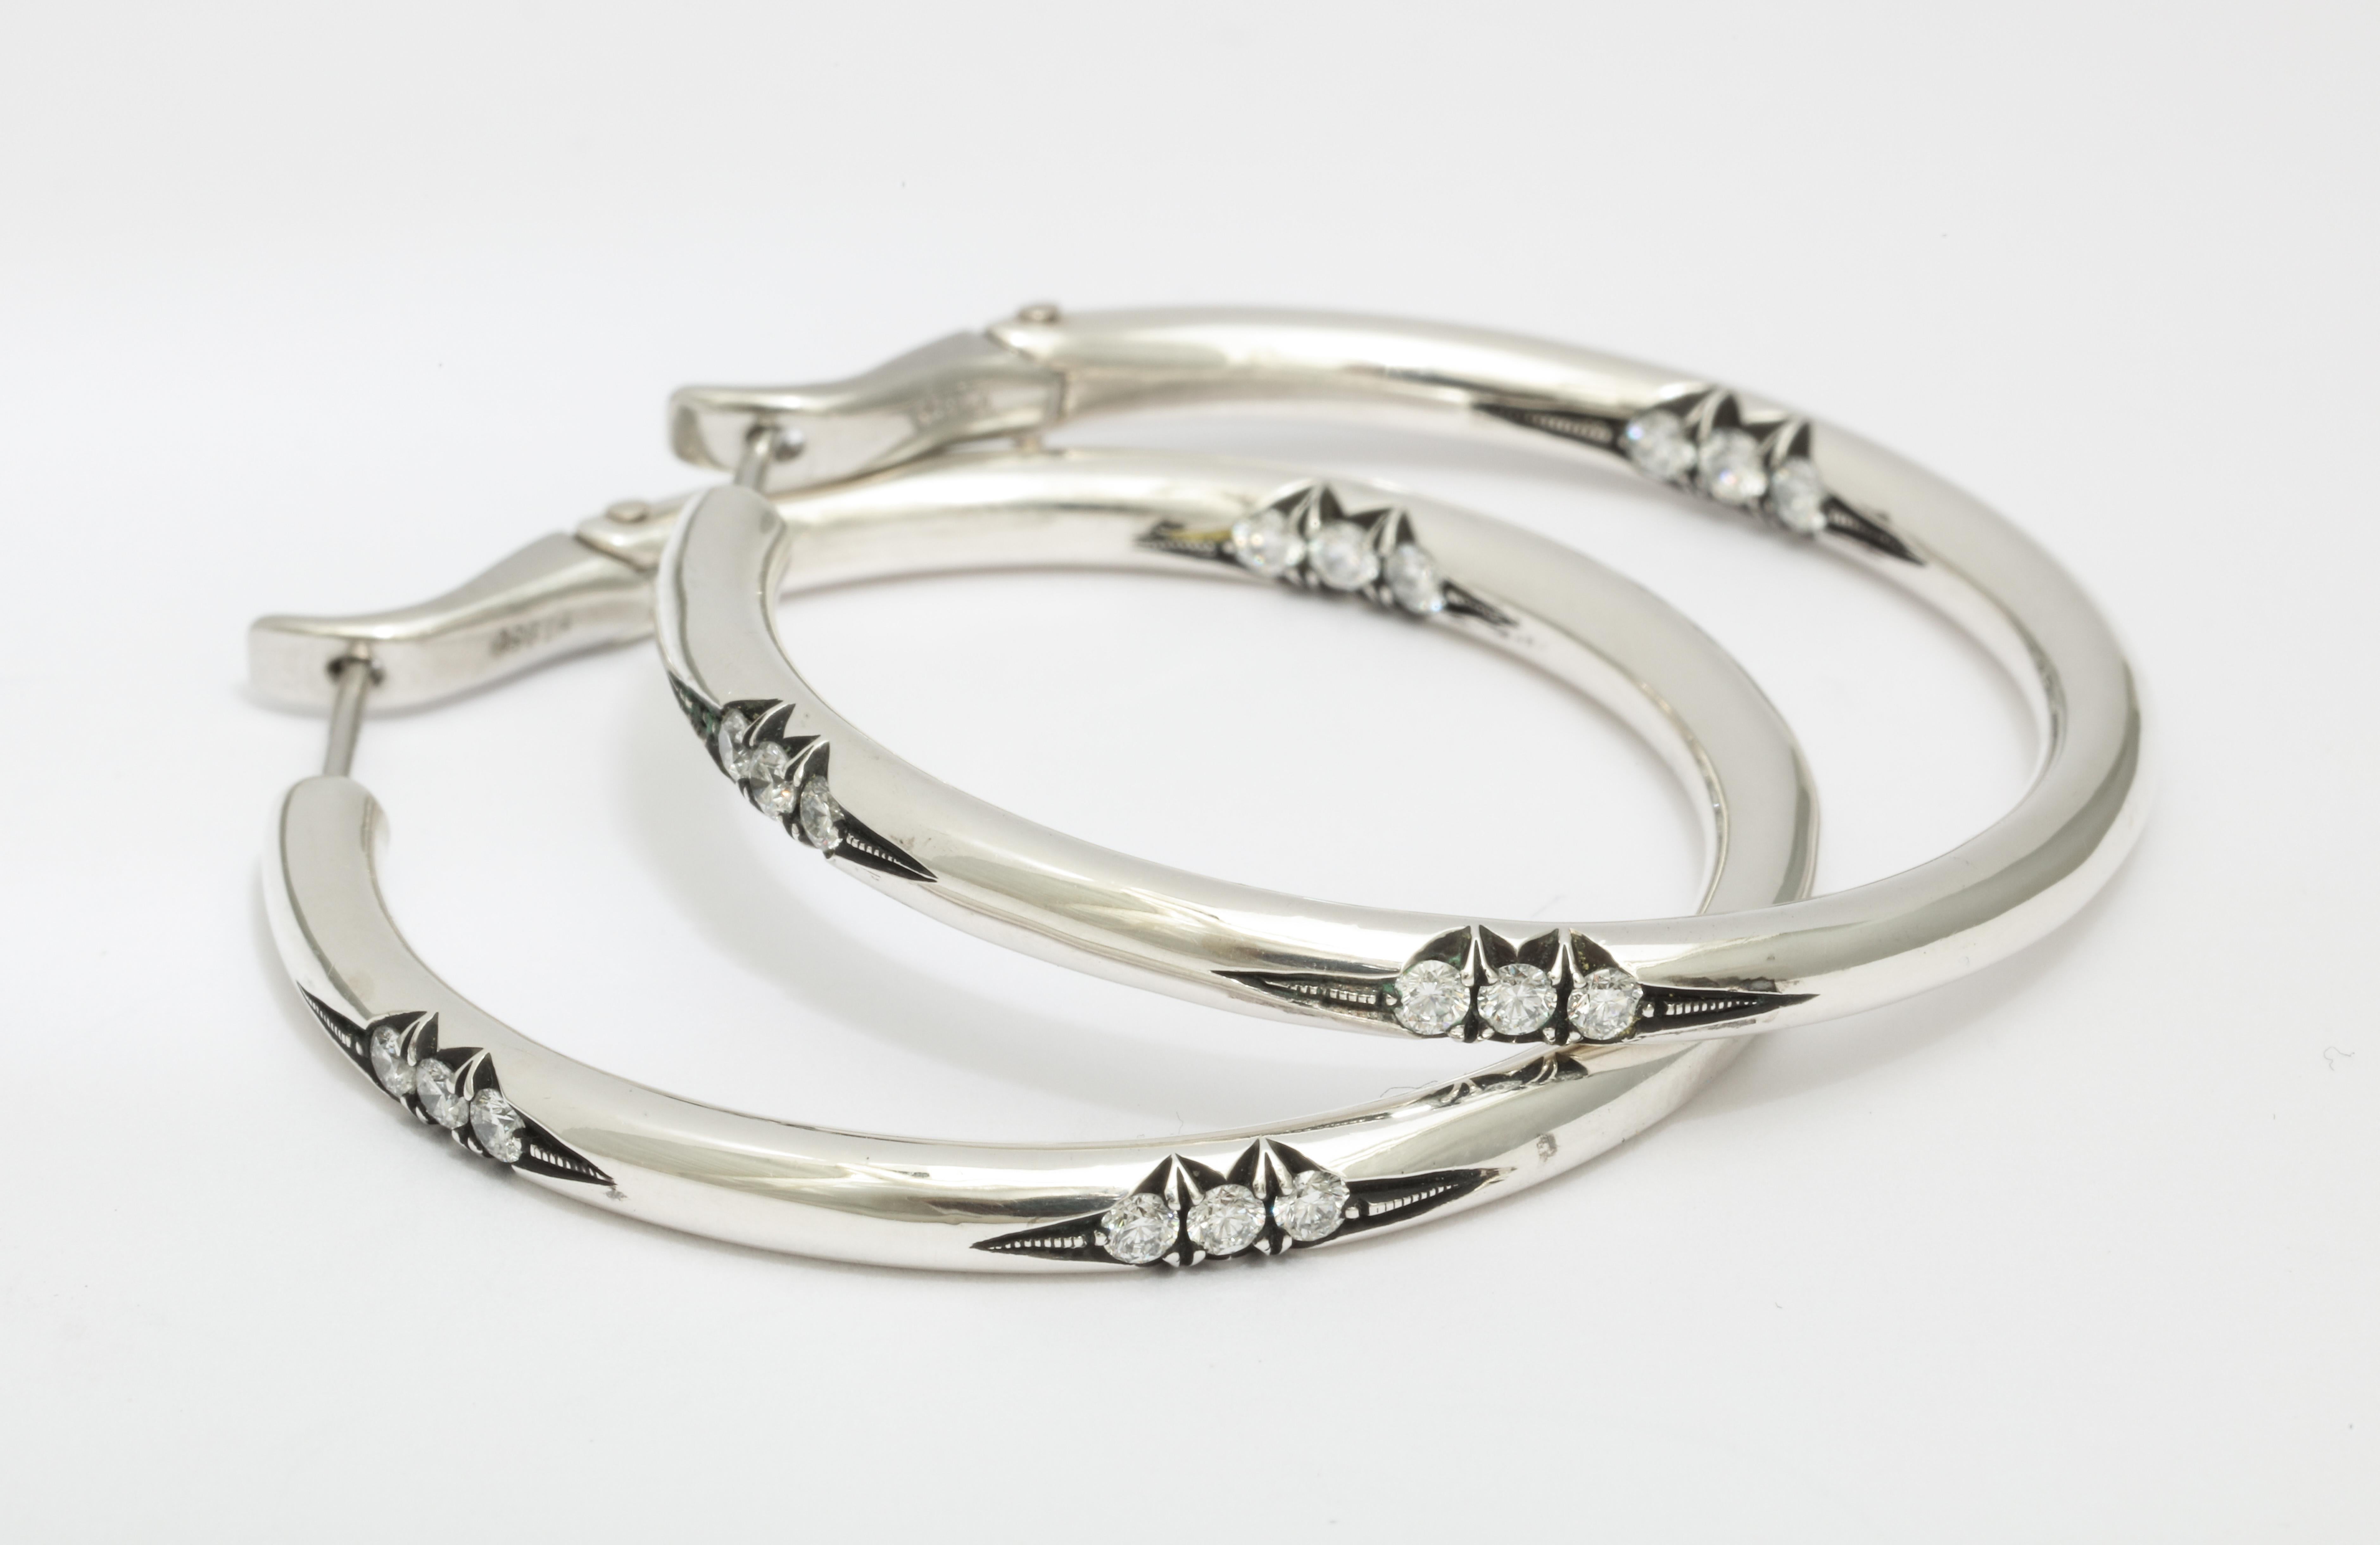 These hoops are designed to be striking yet comfortable, as well as versatile. They are the perfect size for day into night.  With just the right amount of diamond detail, ( approximately 1/2 carat total weight) the hand engraved design is inspired